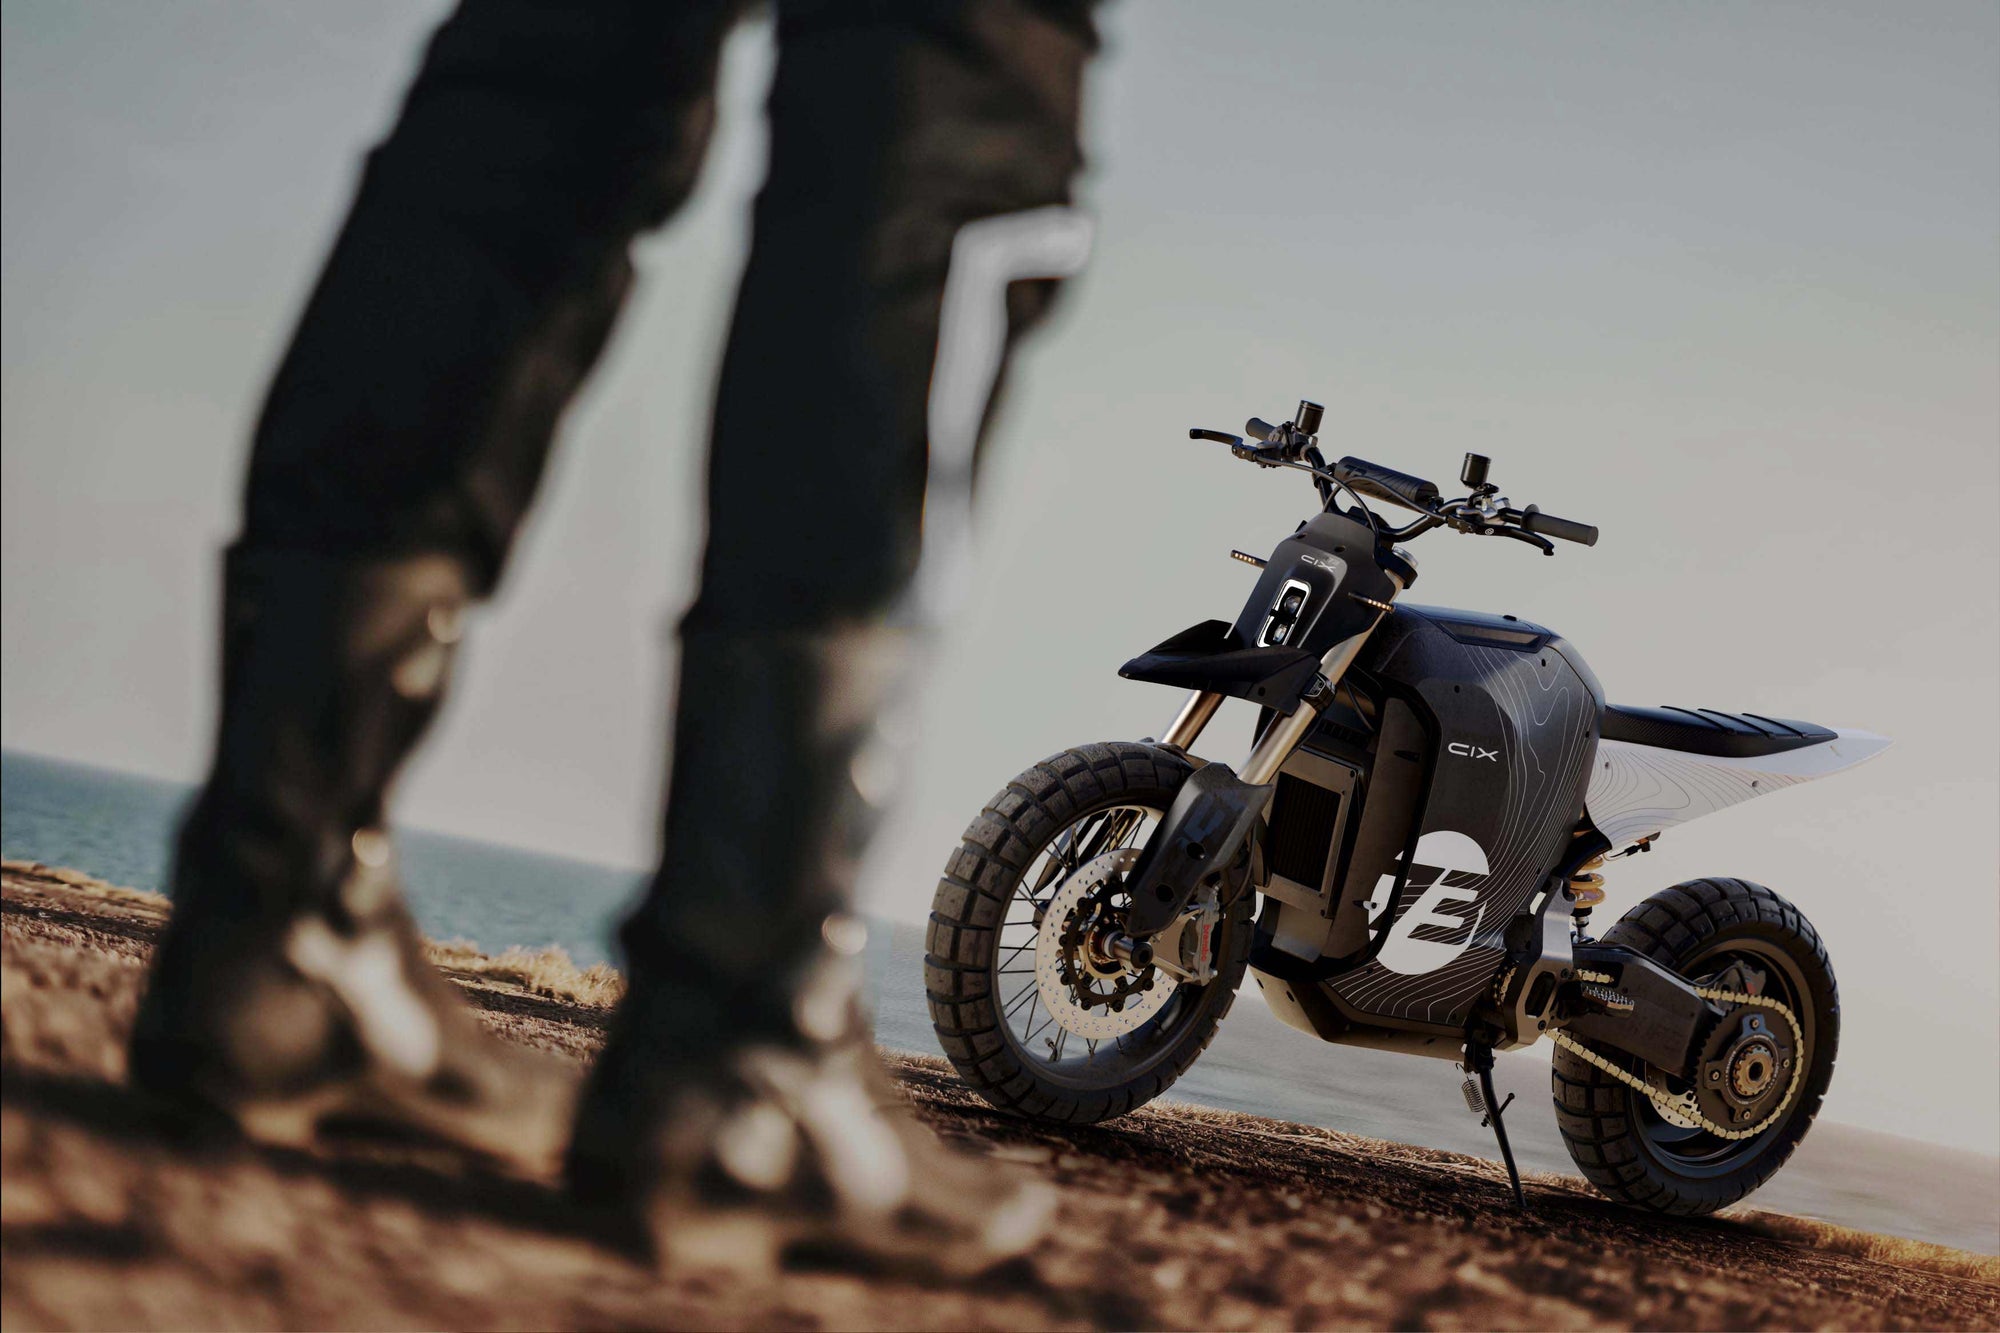 Lifestyle image of the El Jefe Scrambler Dual Sport C1X bike with a rider in the foreground